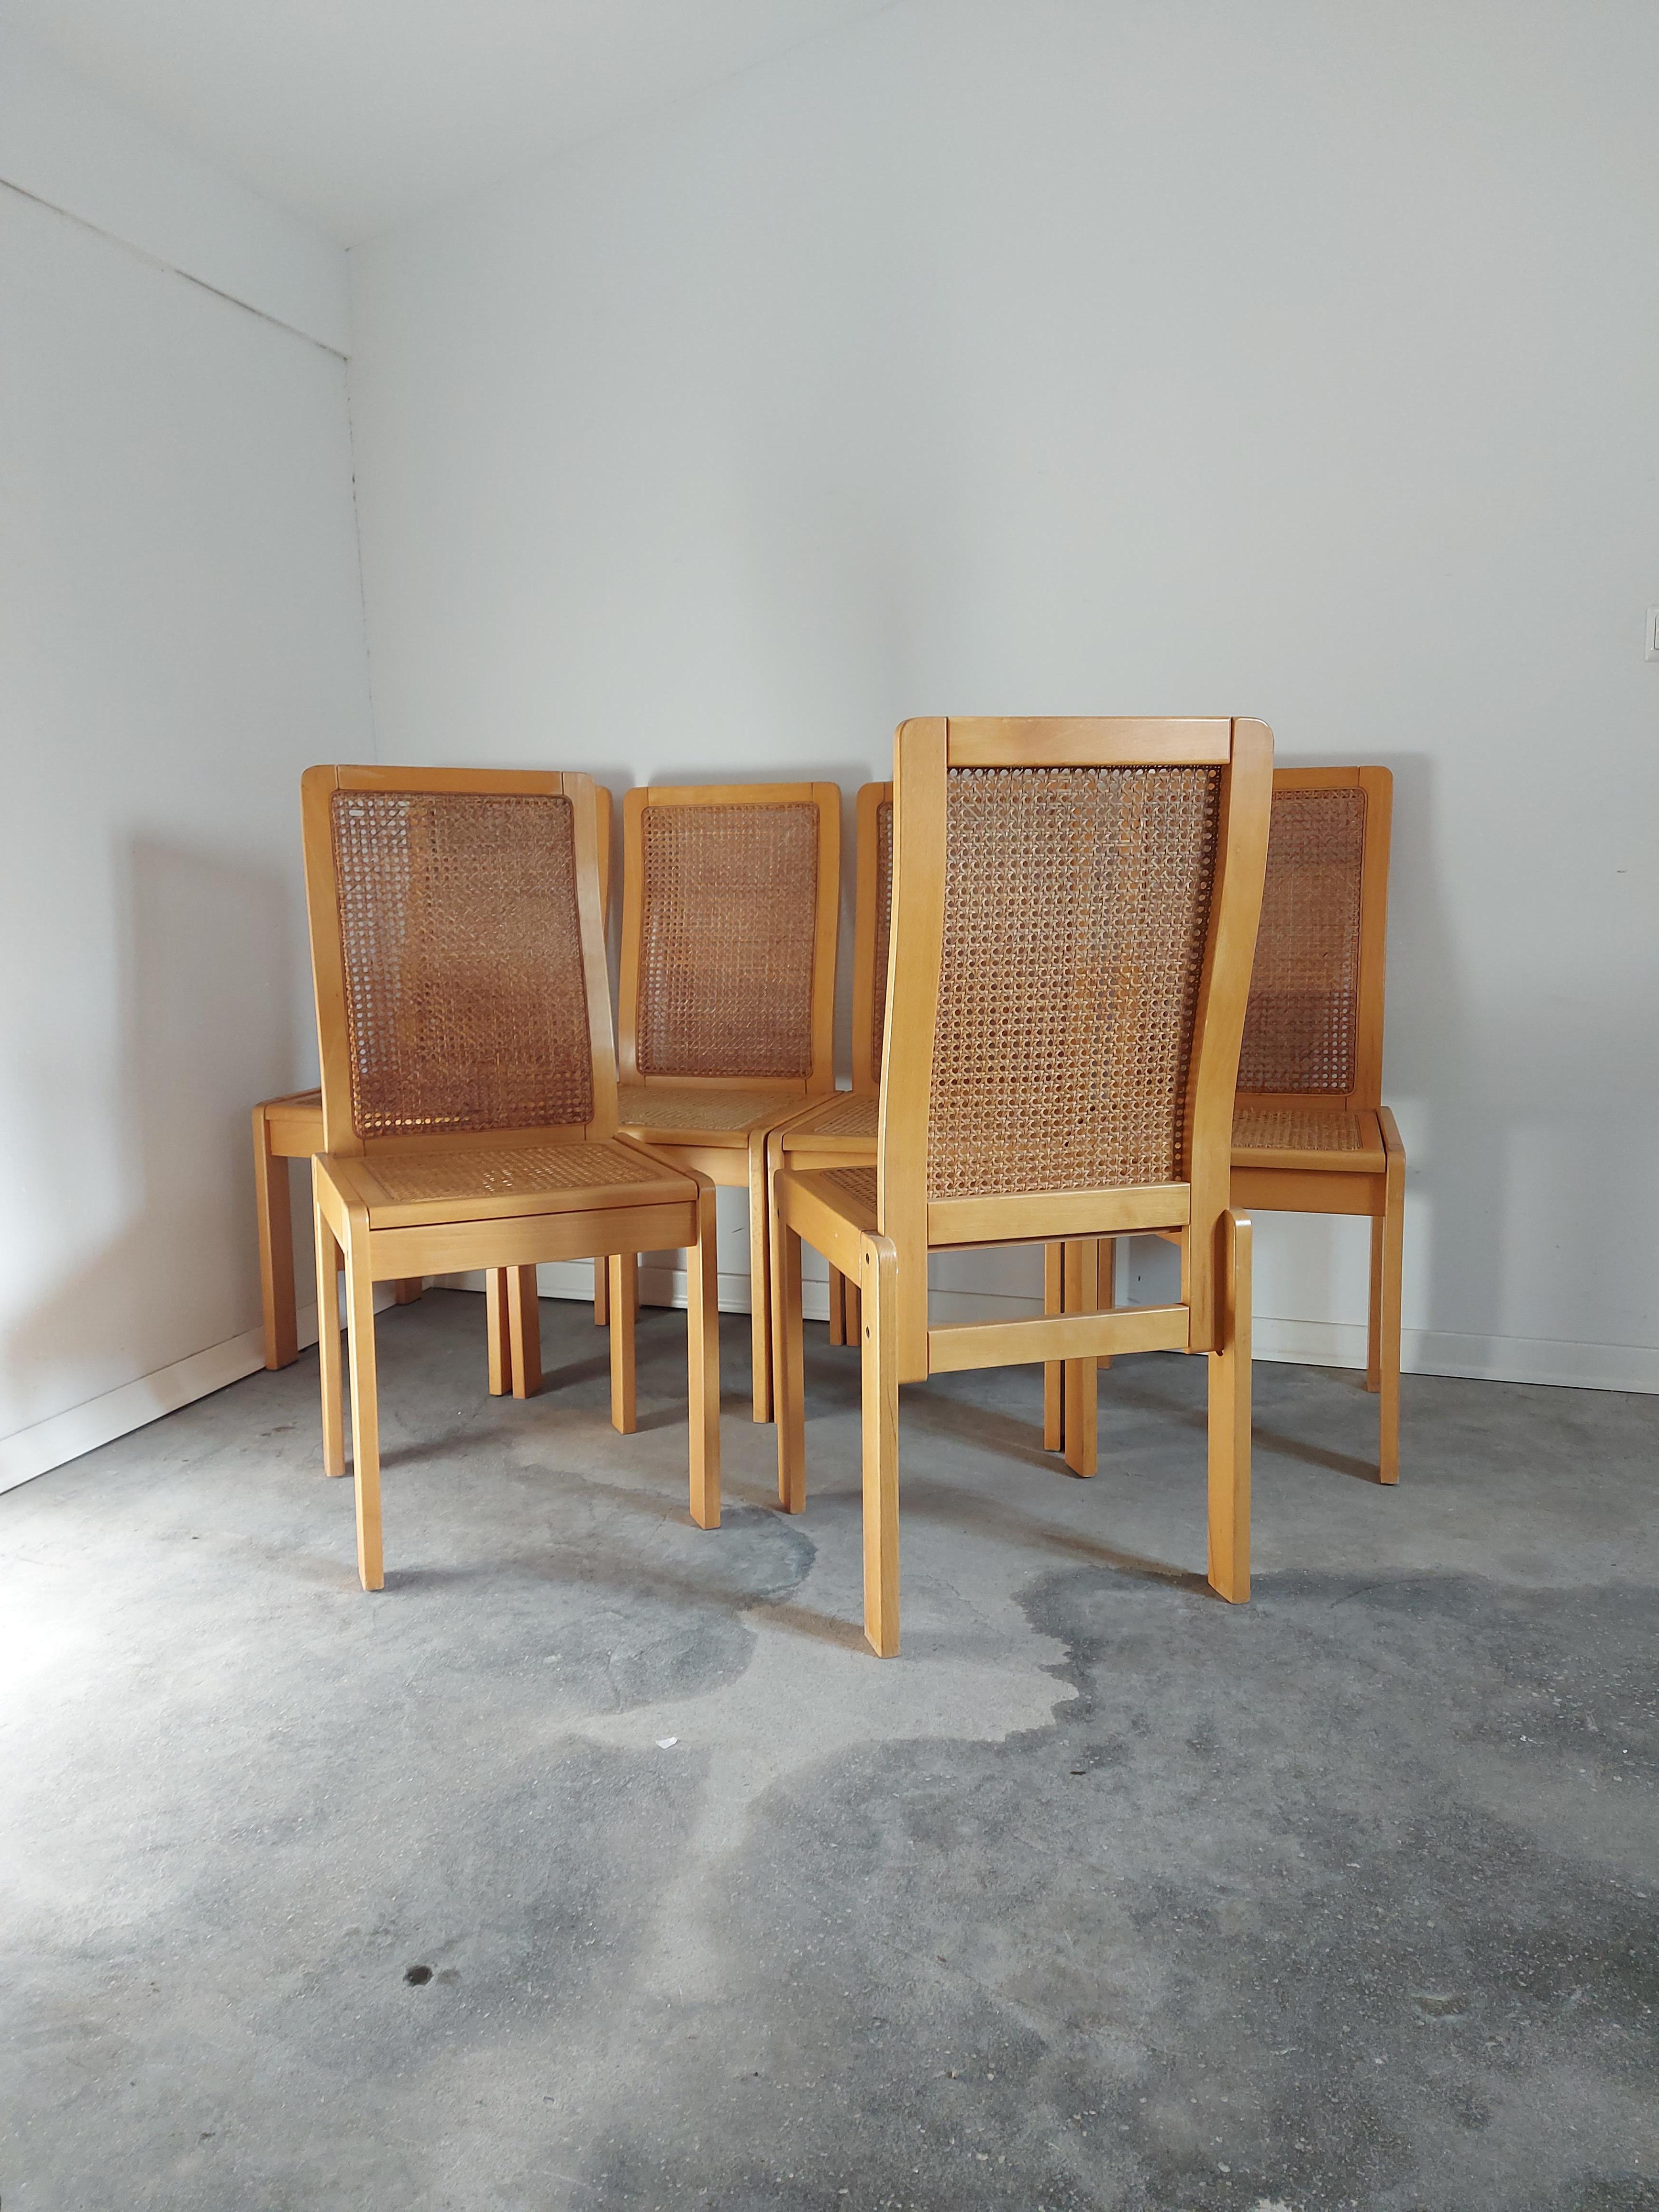 Rare dining chairs, cane seat and back;

Material: wood, cane;

Period: 1970s;

Style: Mid-century;

Condition: Original condition (broken parts of cane on back rest);

Restoration of cane can be done if the buyer wants.